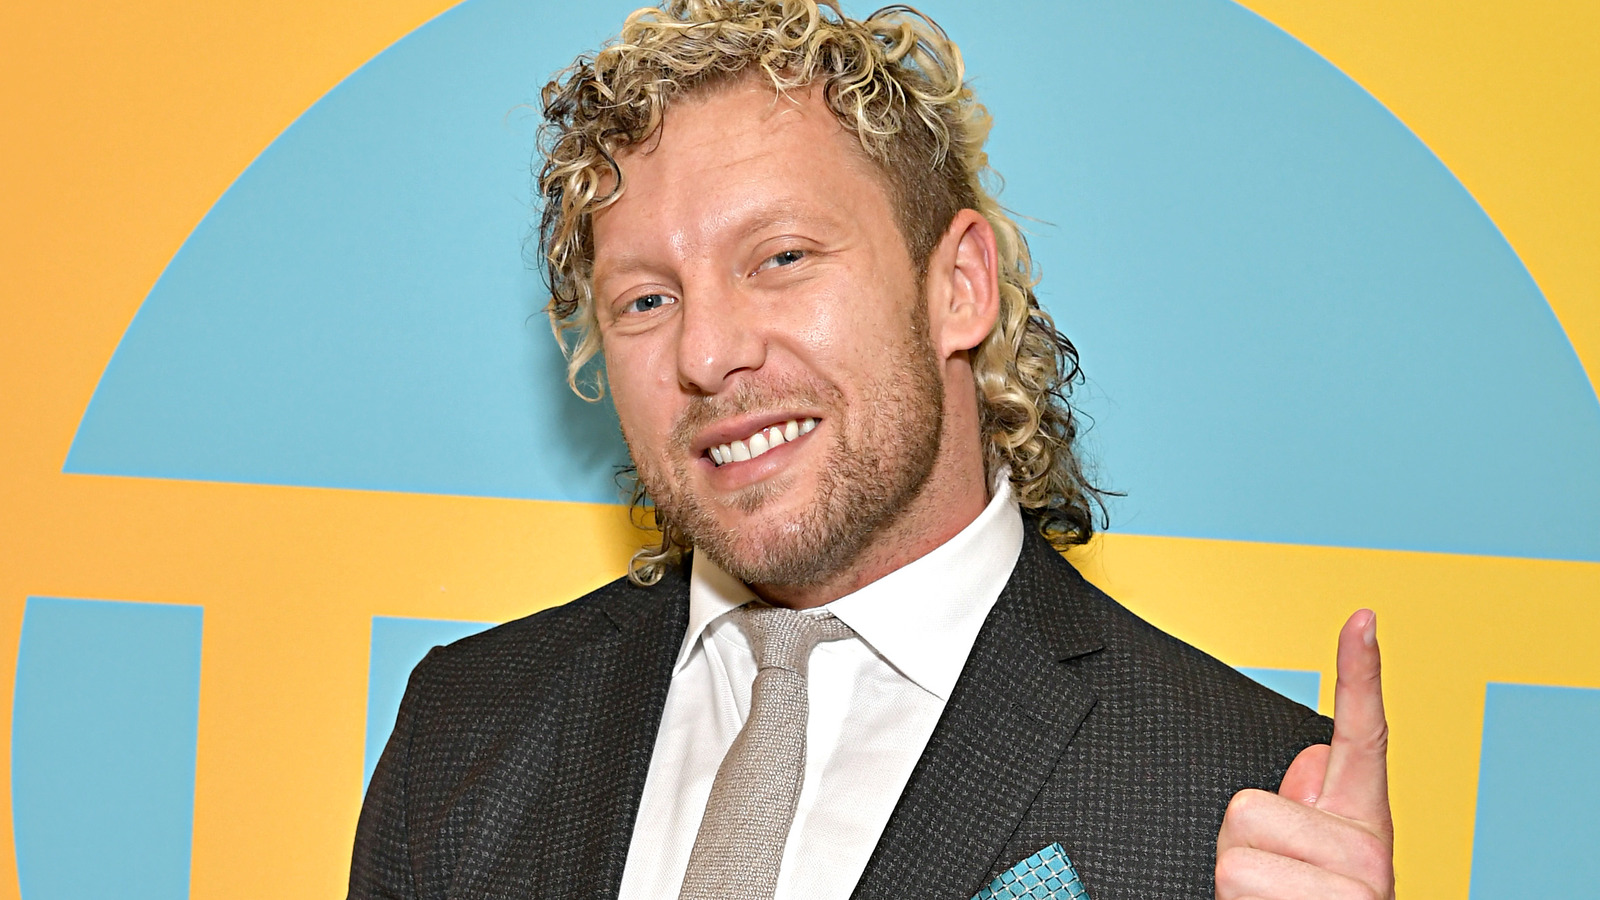 AEW EVP Kenny Omega To Make An 'Important Announcement' On AEW
Dynamite